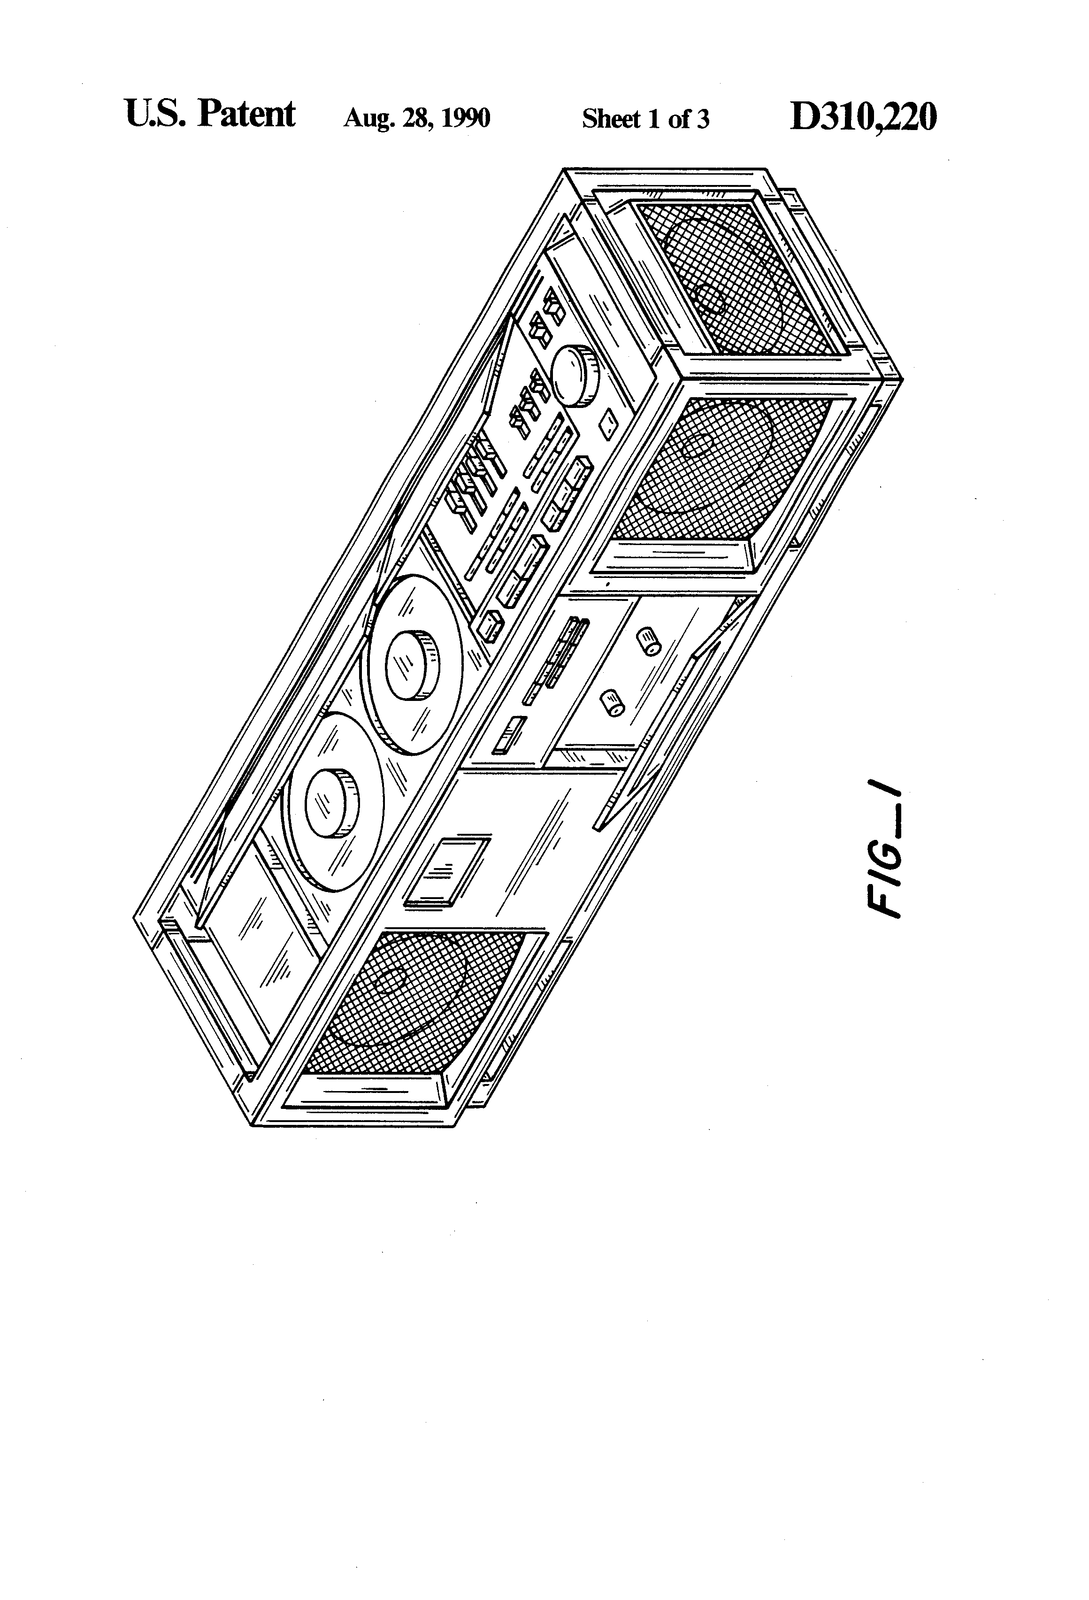 USD310220-1.png